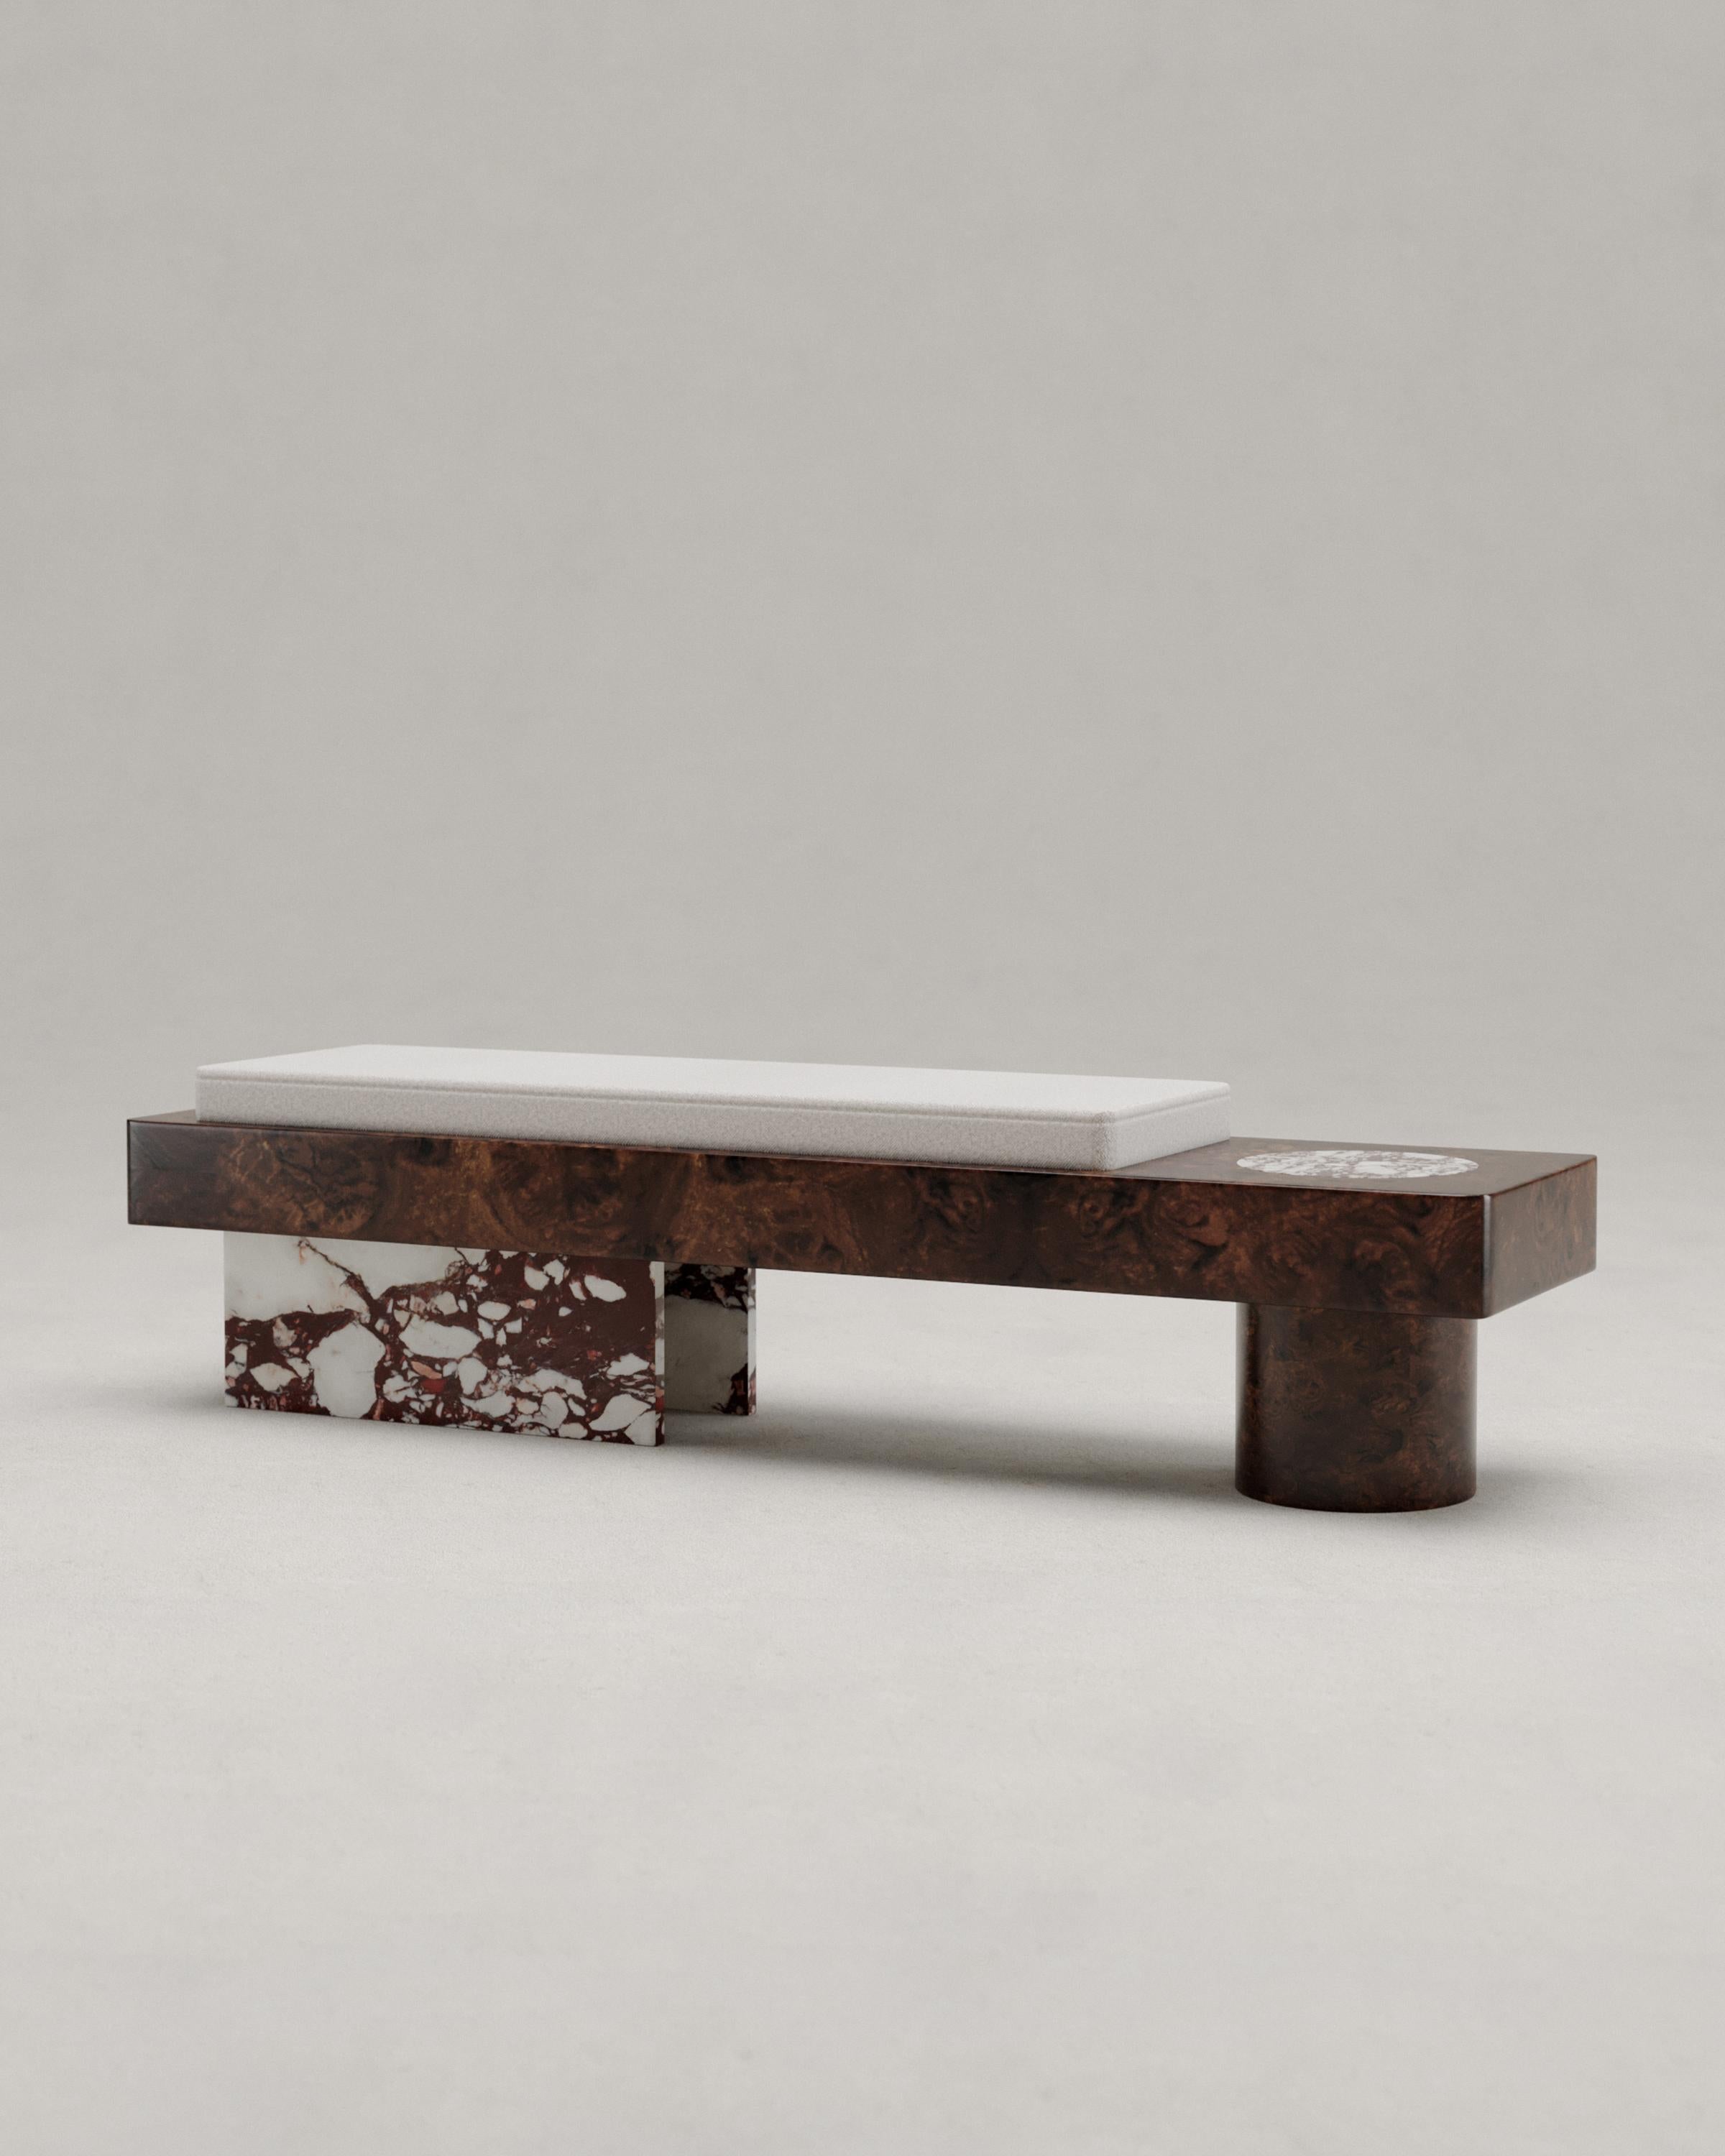 Salvante BS1 Bench by Piotr Dąbrowa
Unique Piece
Dimensions: W 160 x D 40 x H 40 cm
Materials: Calacatta Viola marble, walnut burl.
Also available: Calacatta marble, Rosa Peralba marble.

Salvante collection is a play between shapes, materials &